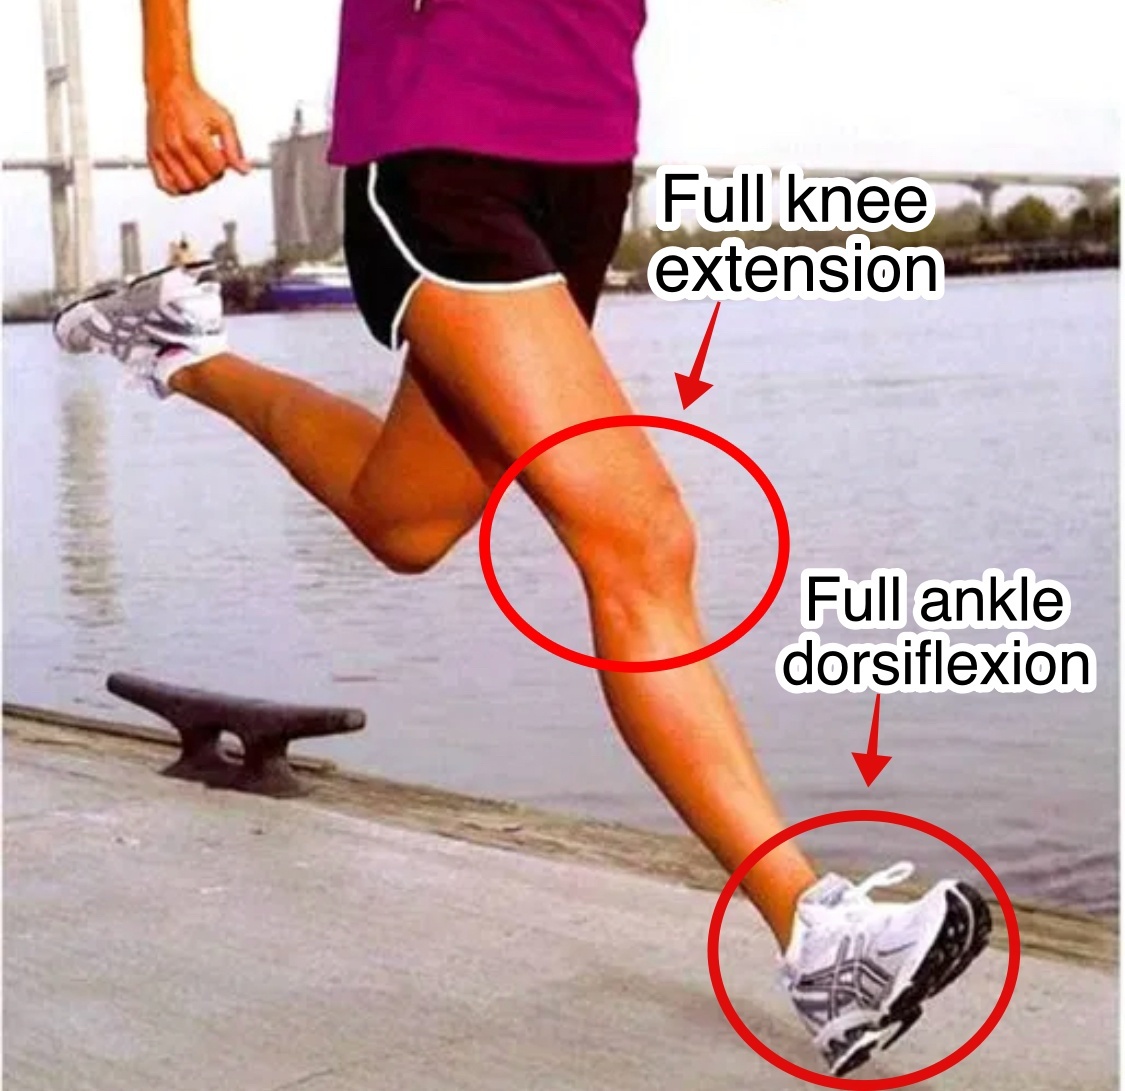 Heel Strike Running is Bad For Your ACL